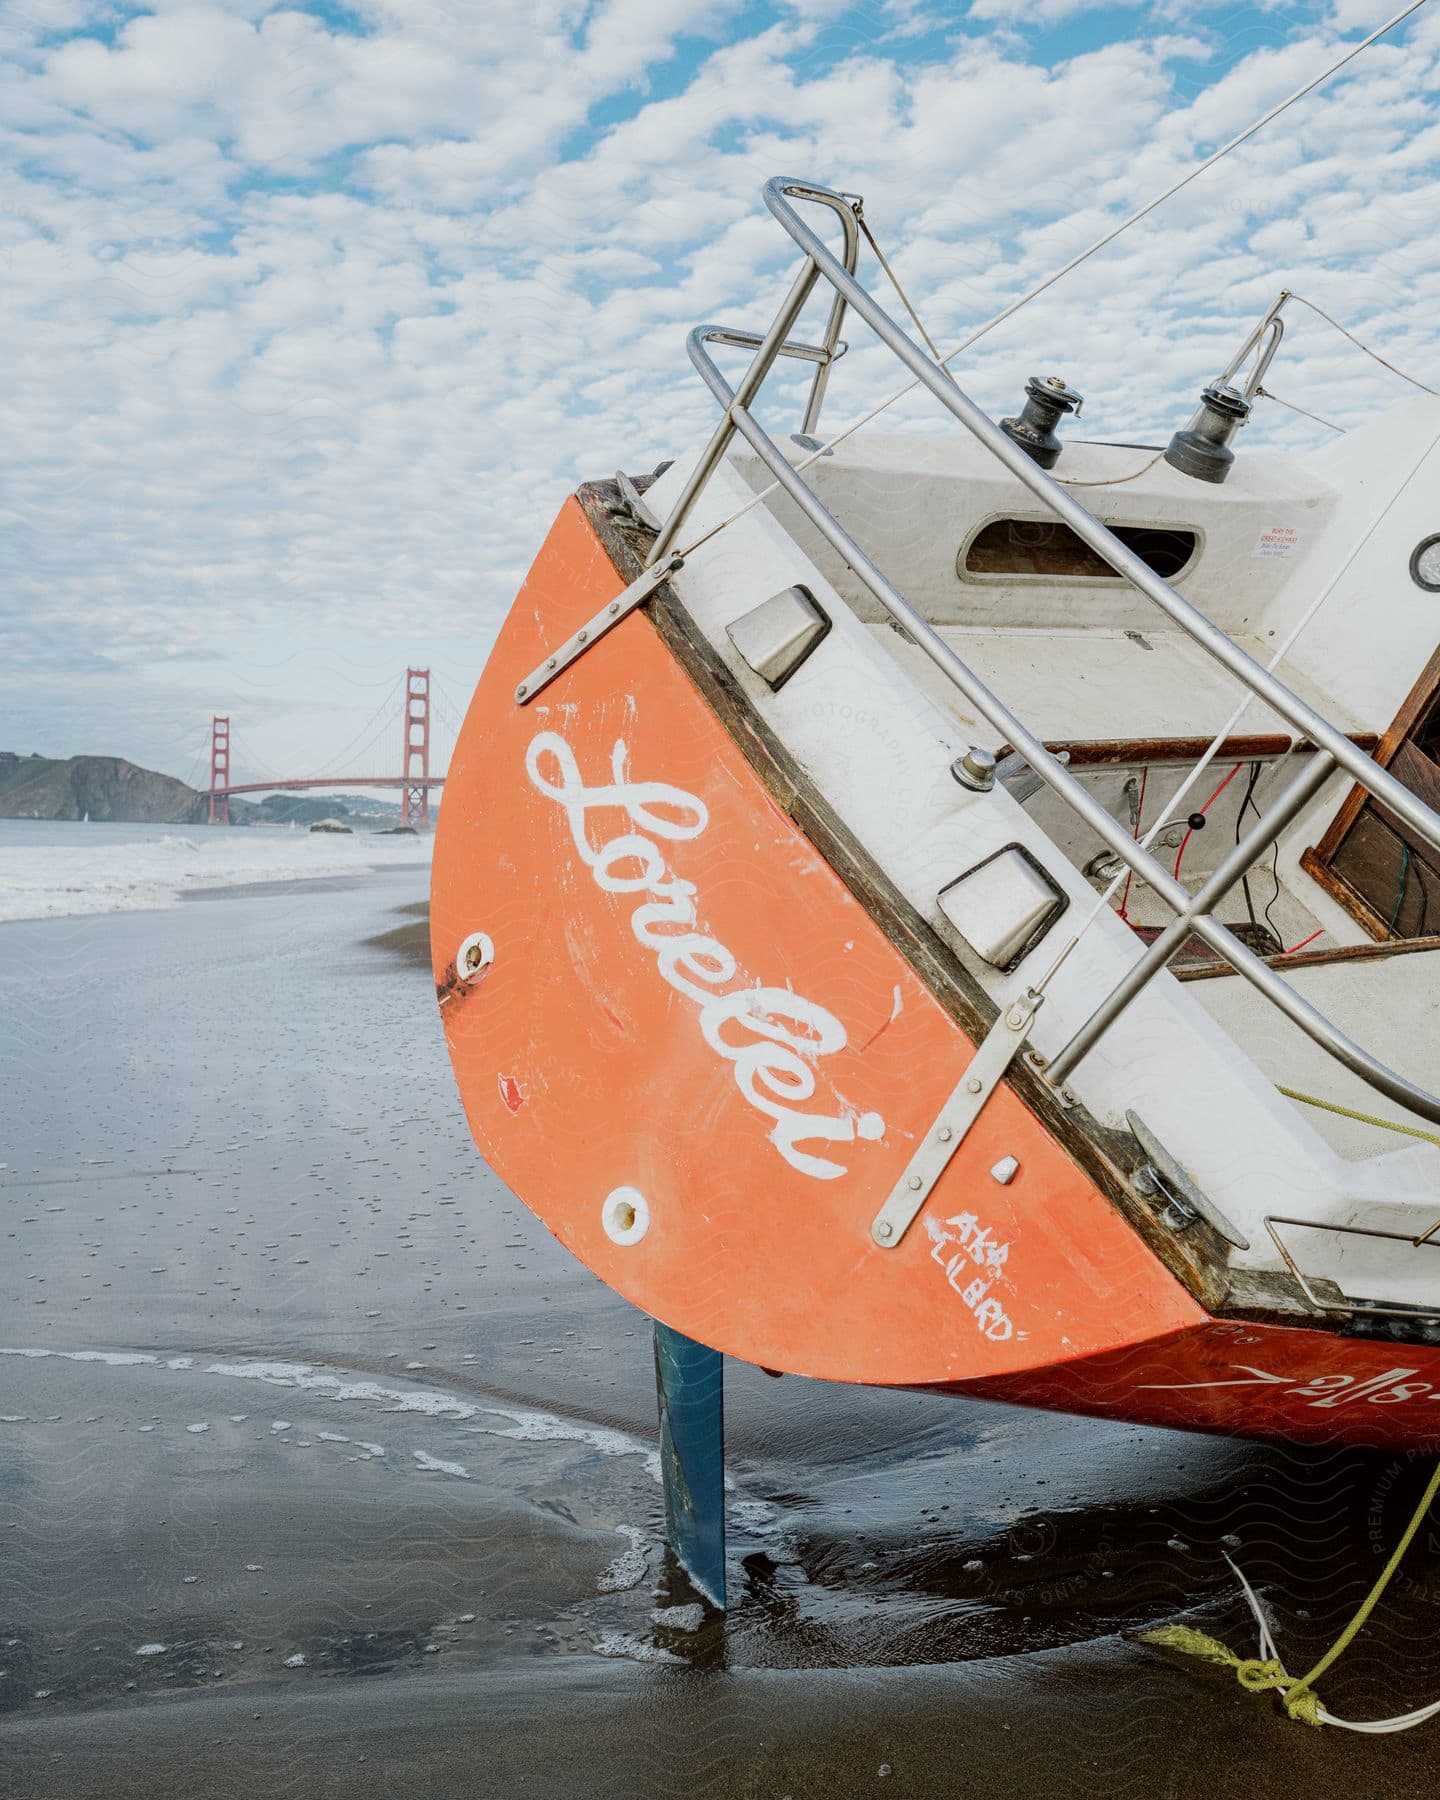 Boat leans on support on the beach with the Golden Gate Bridge in the background on a cloudy day.